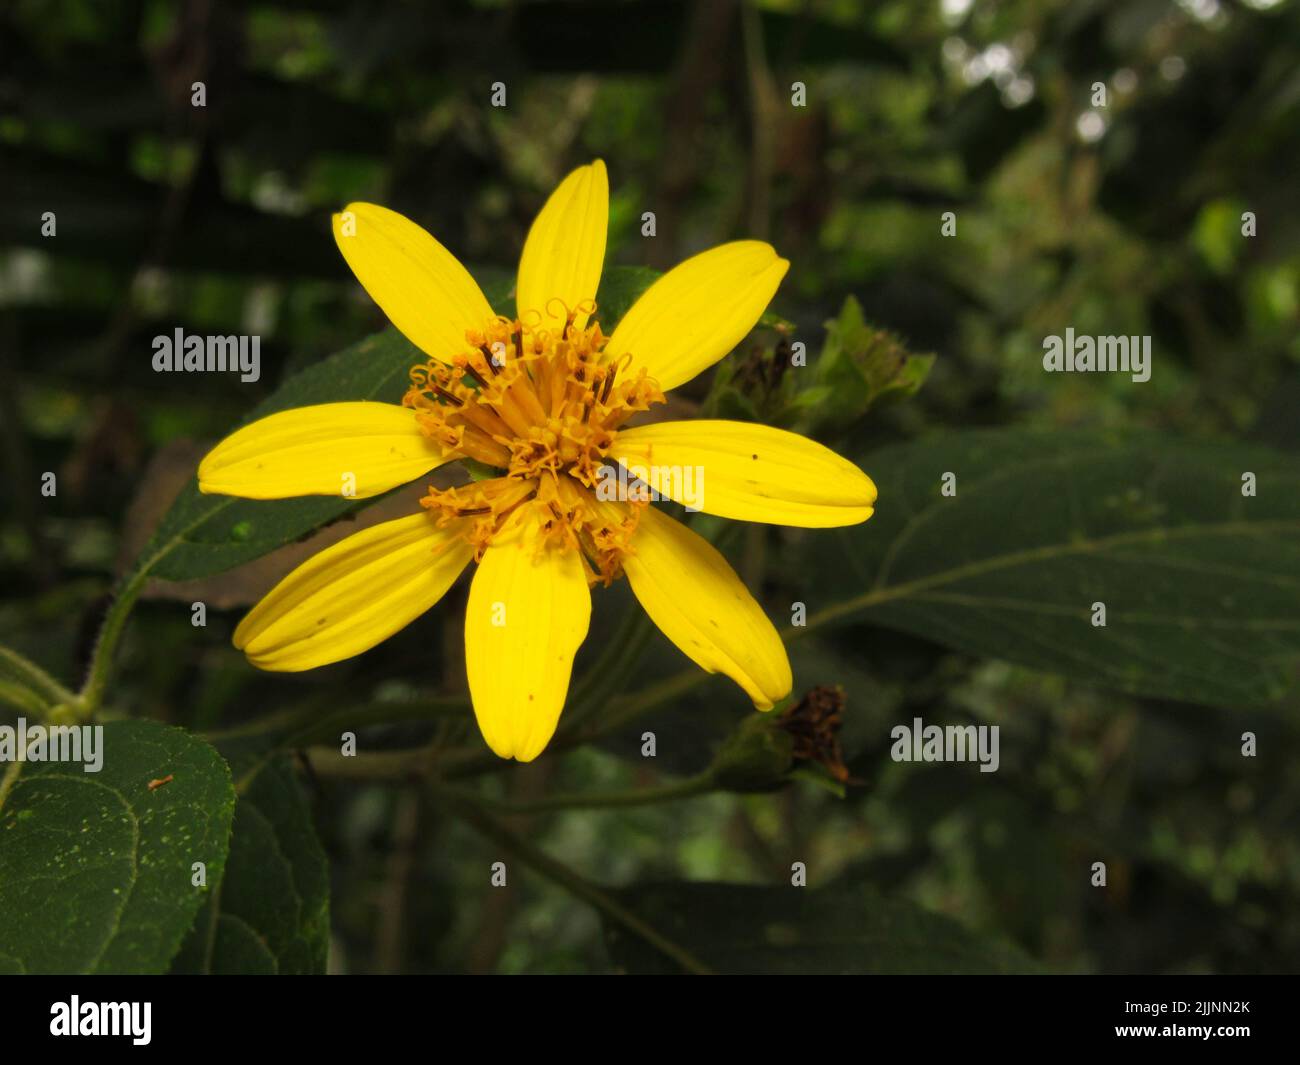 A shot of genus yellow flower plant from the Asteraceae family Stock Photo